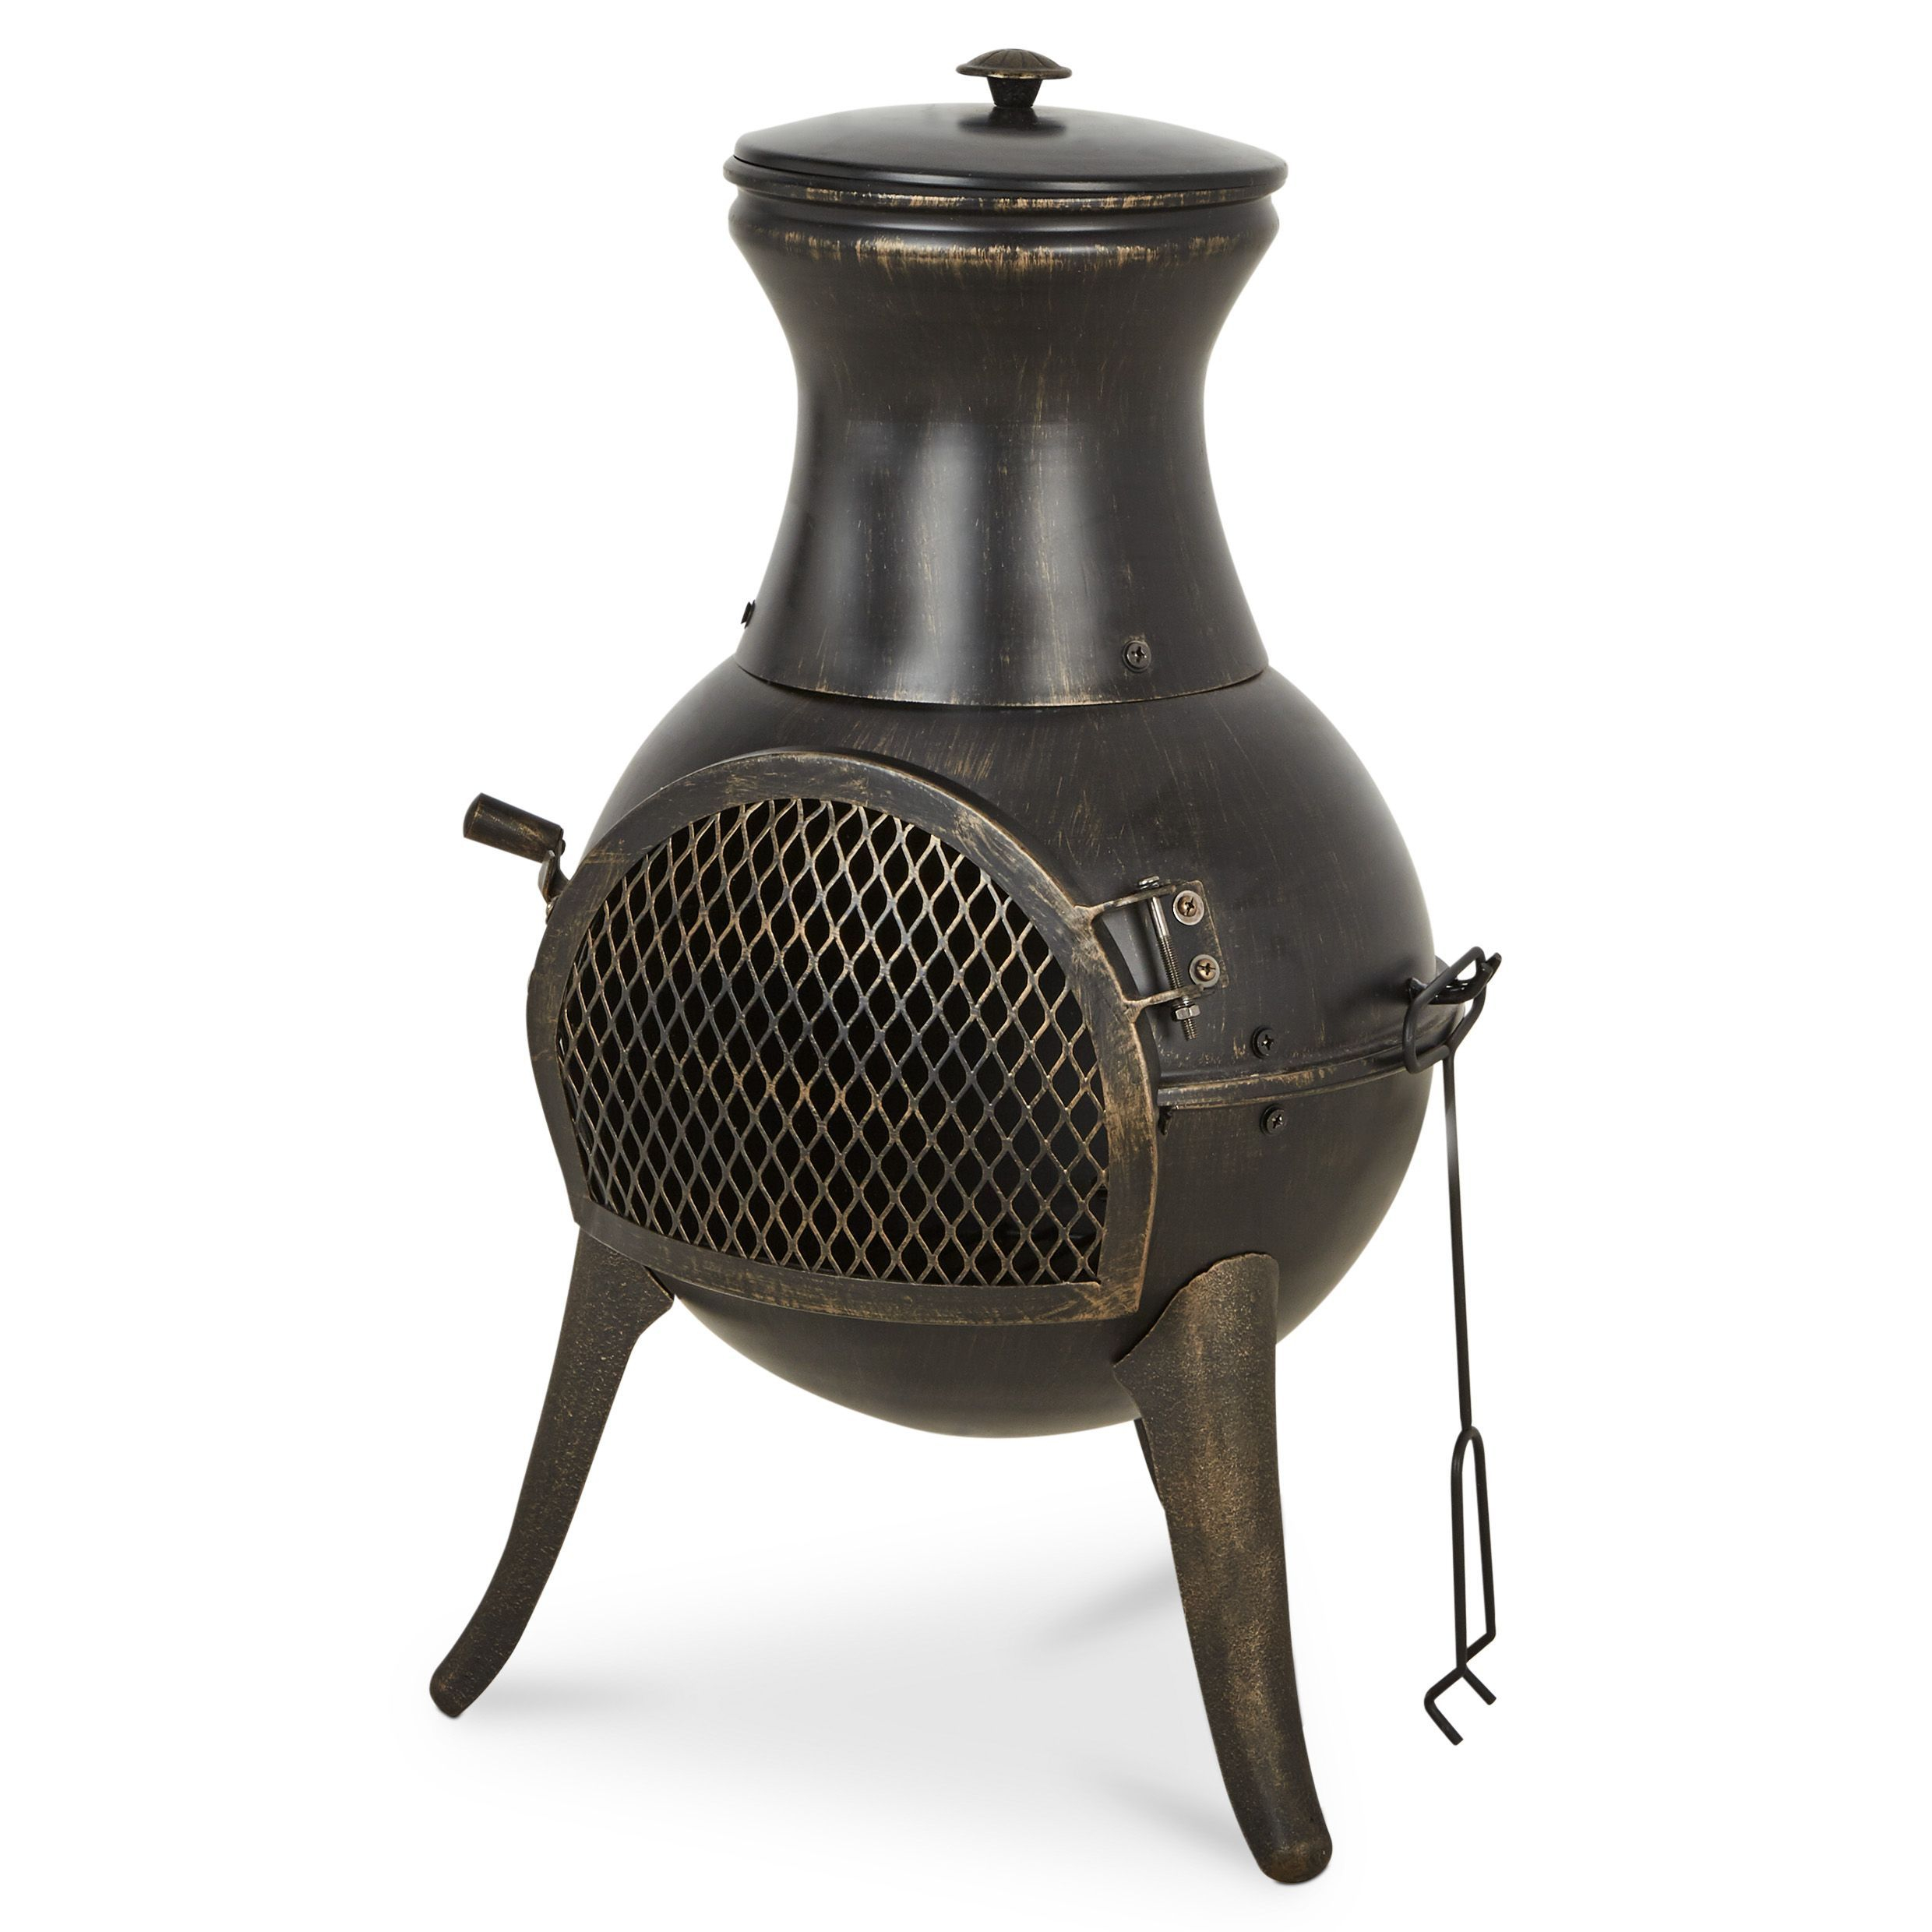 Blooma Diogo Cast Iron Steel Chiminea Chiminea Iron within dimensions 2480 X 2480